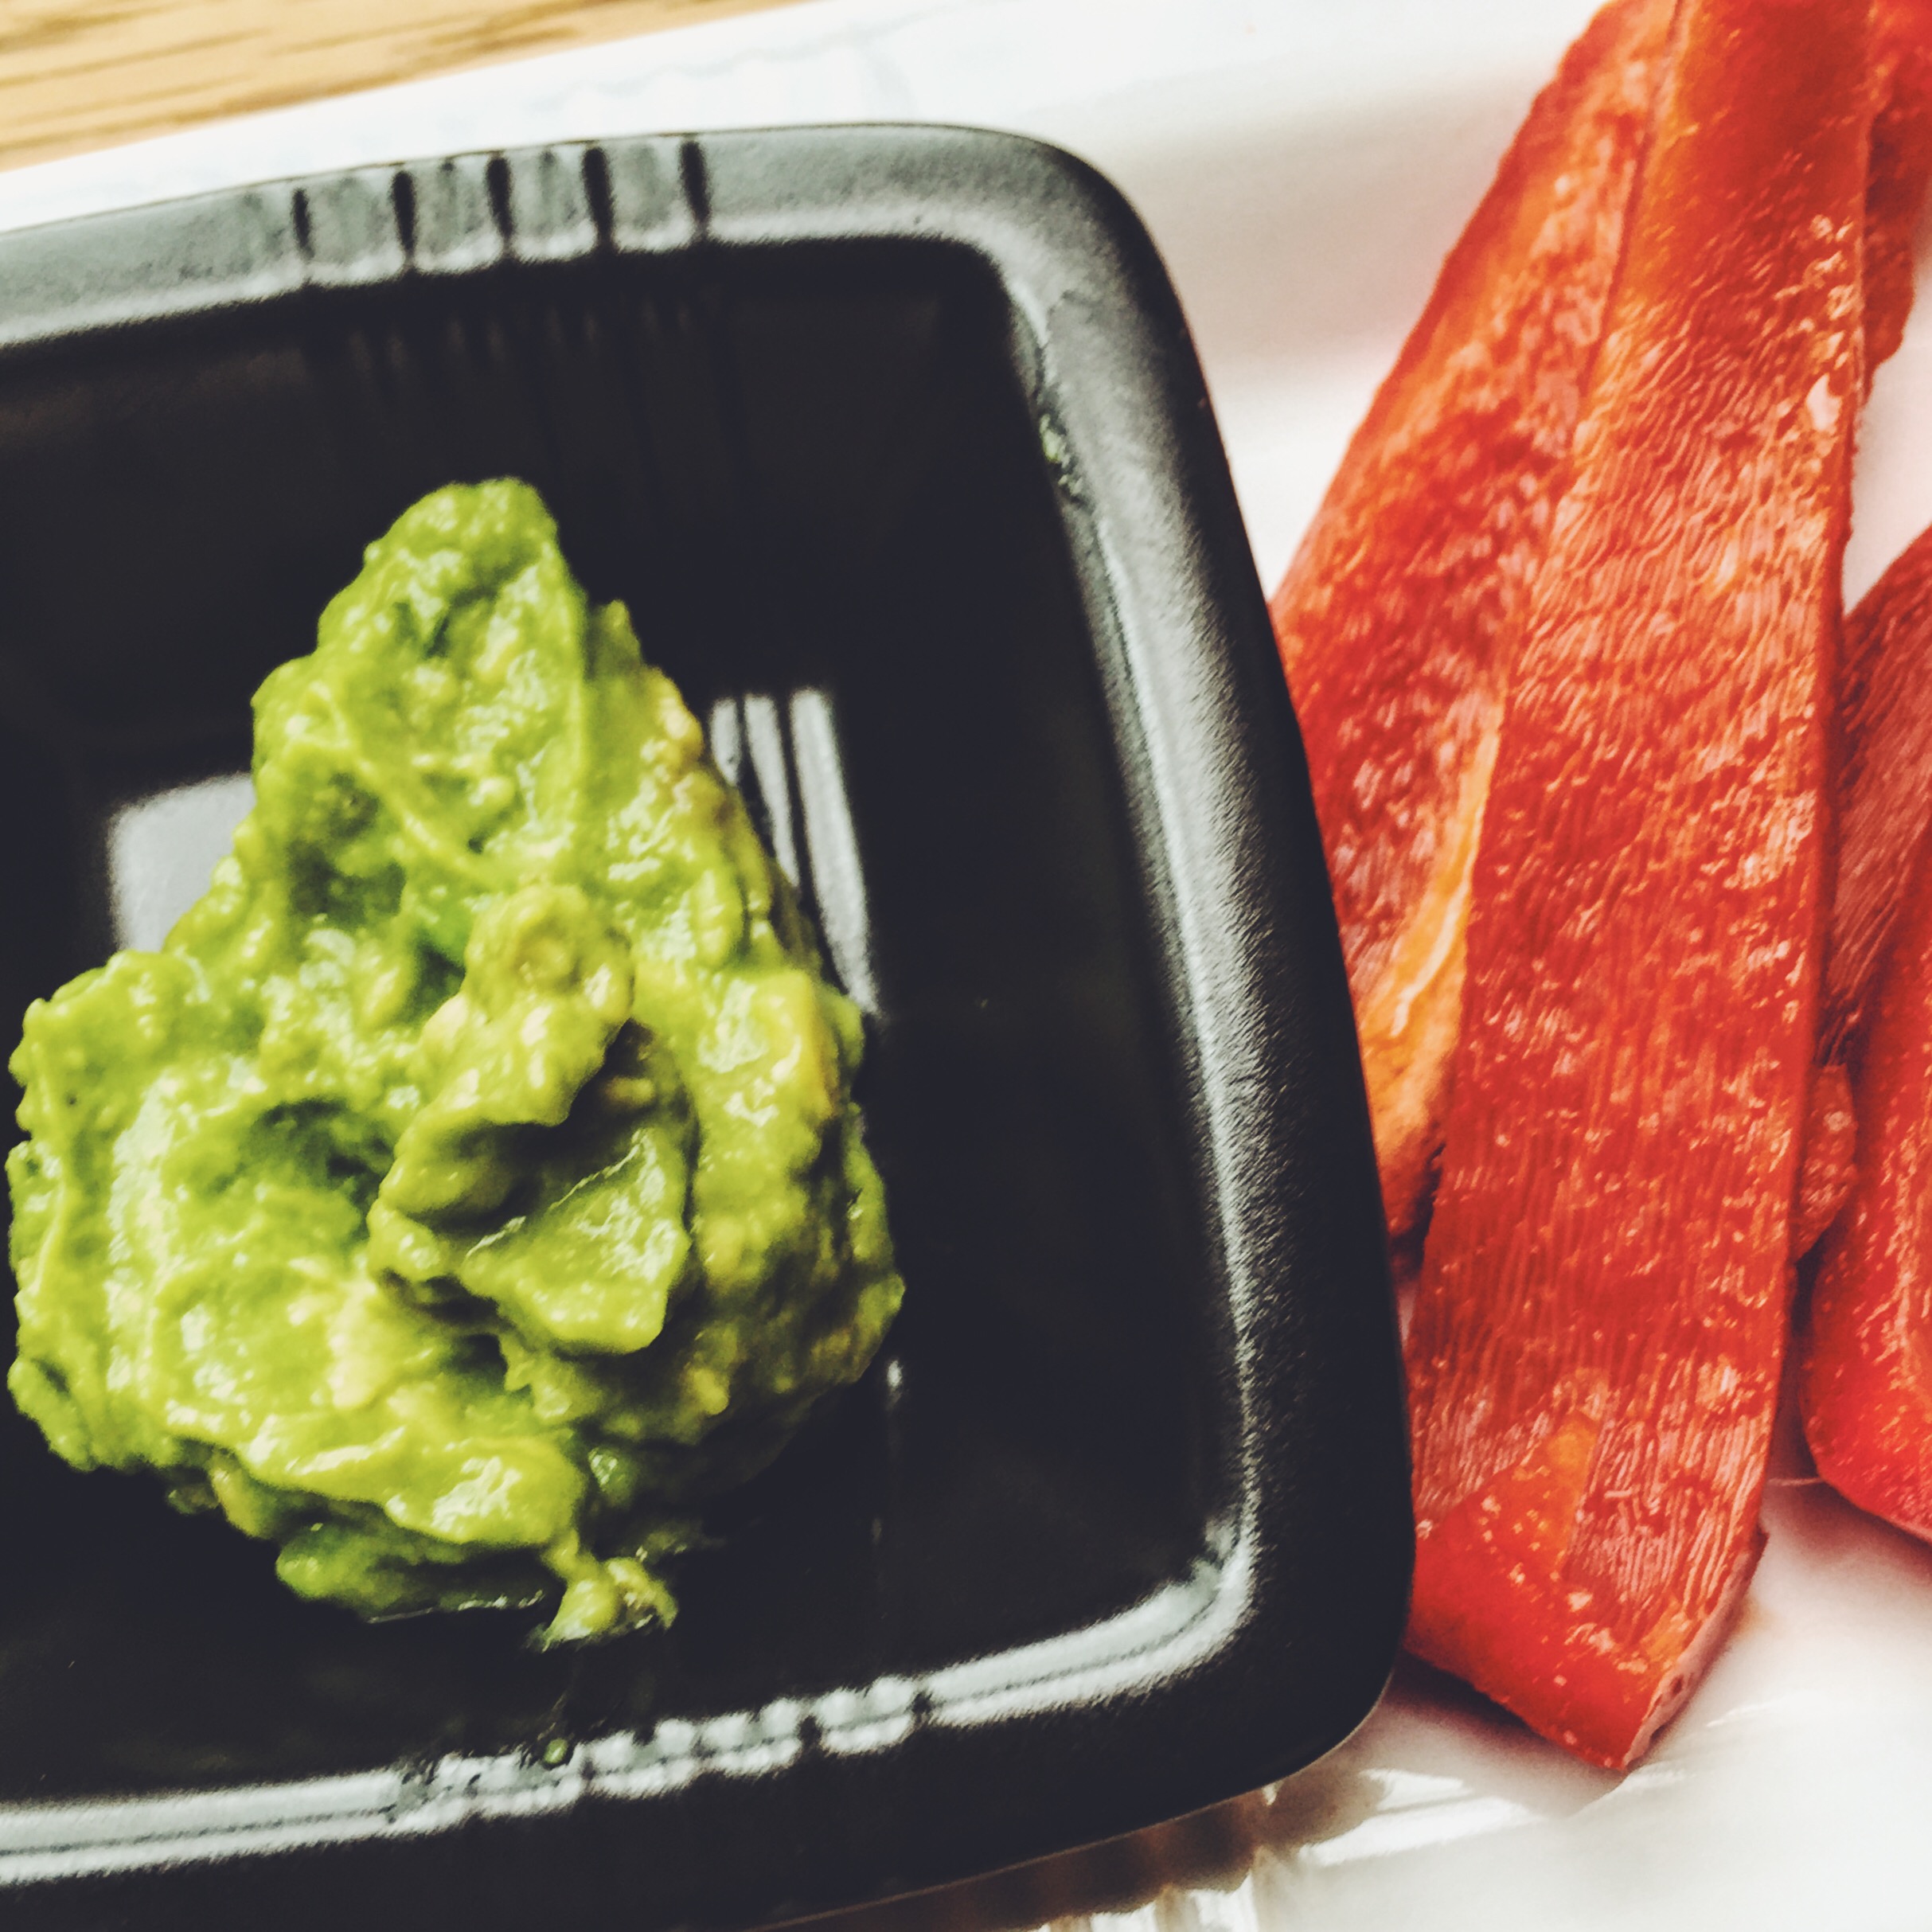 Red Bell Pepper and Guacamole